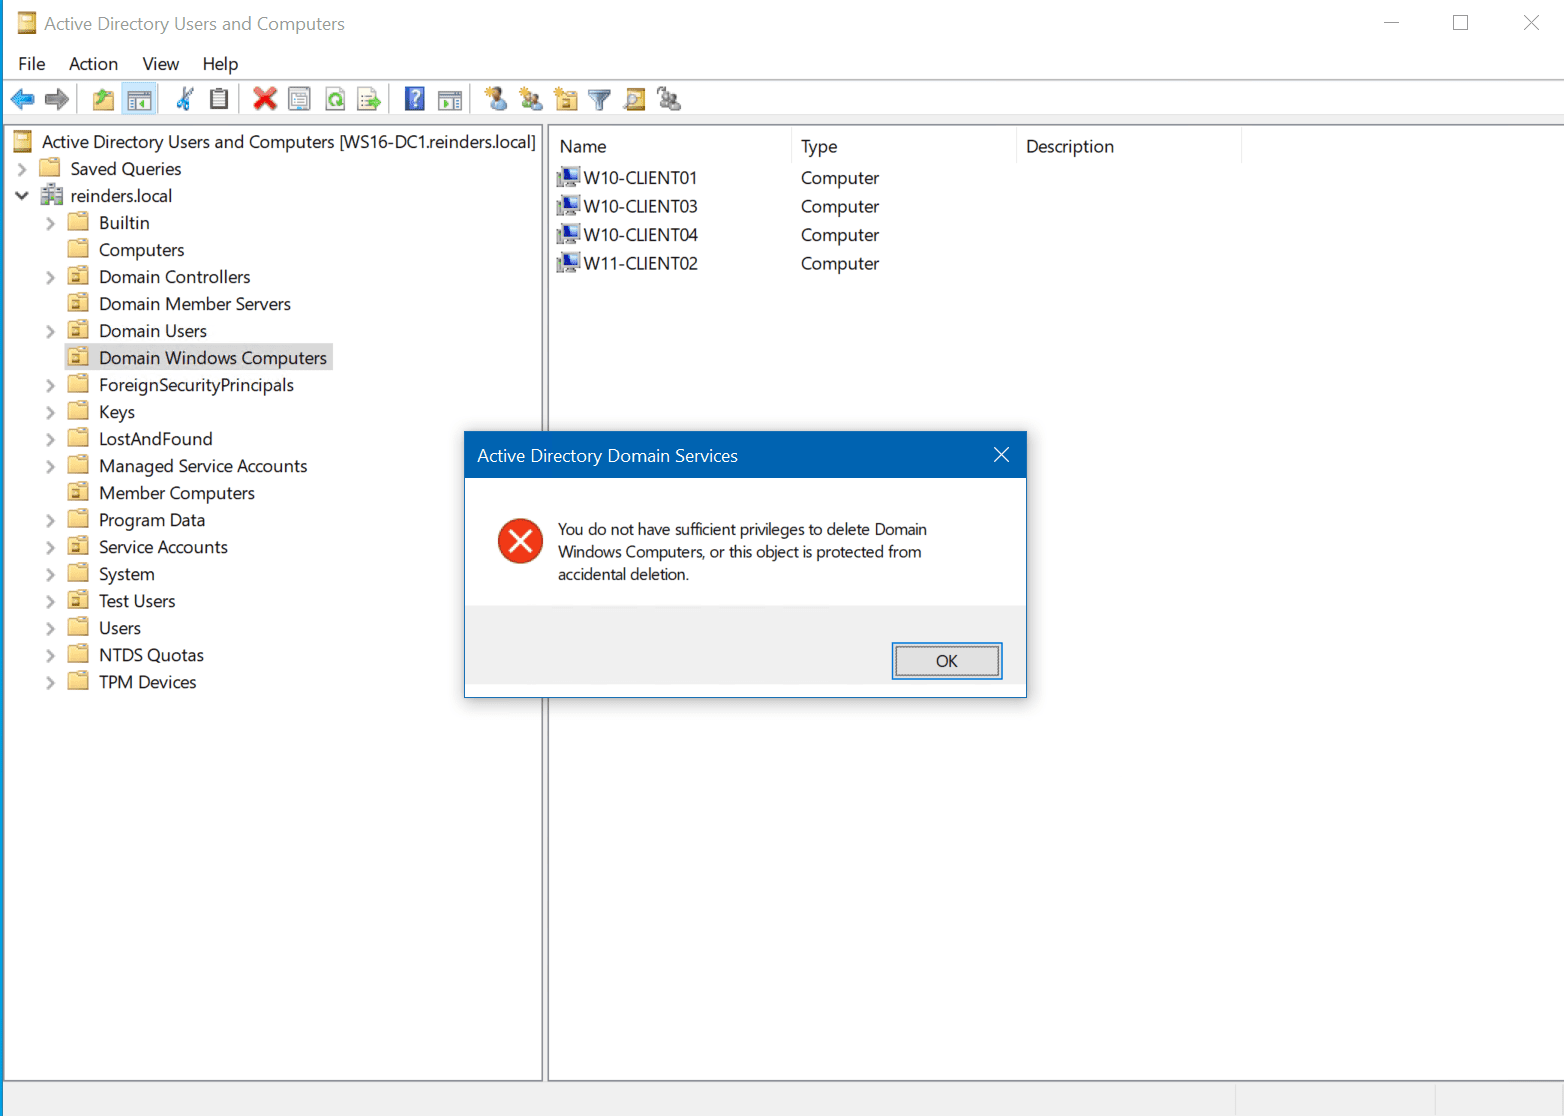 You are unable an organizational unit if the accidental deletion flag is enabled